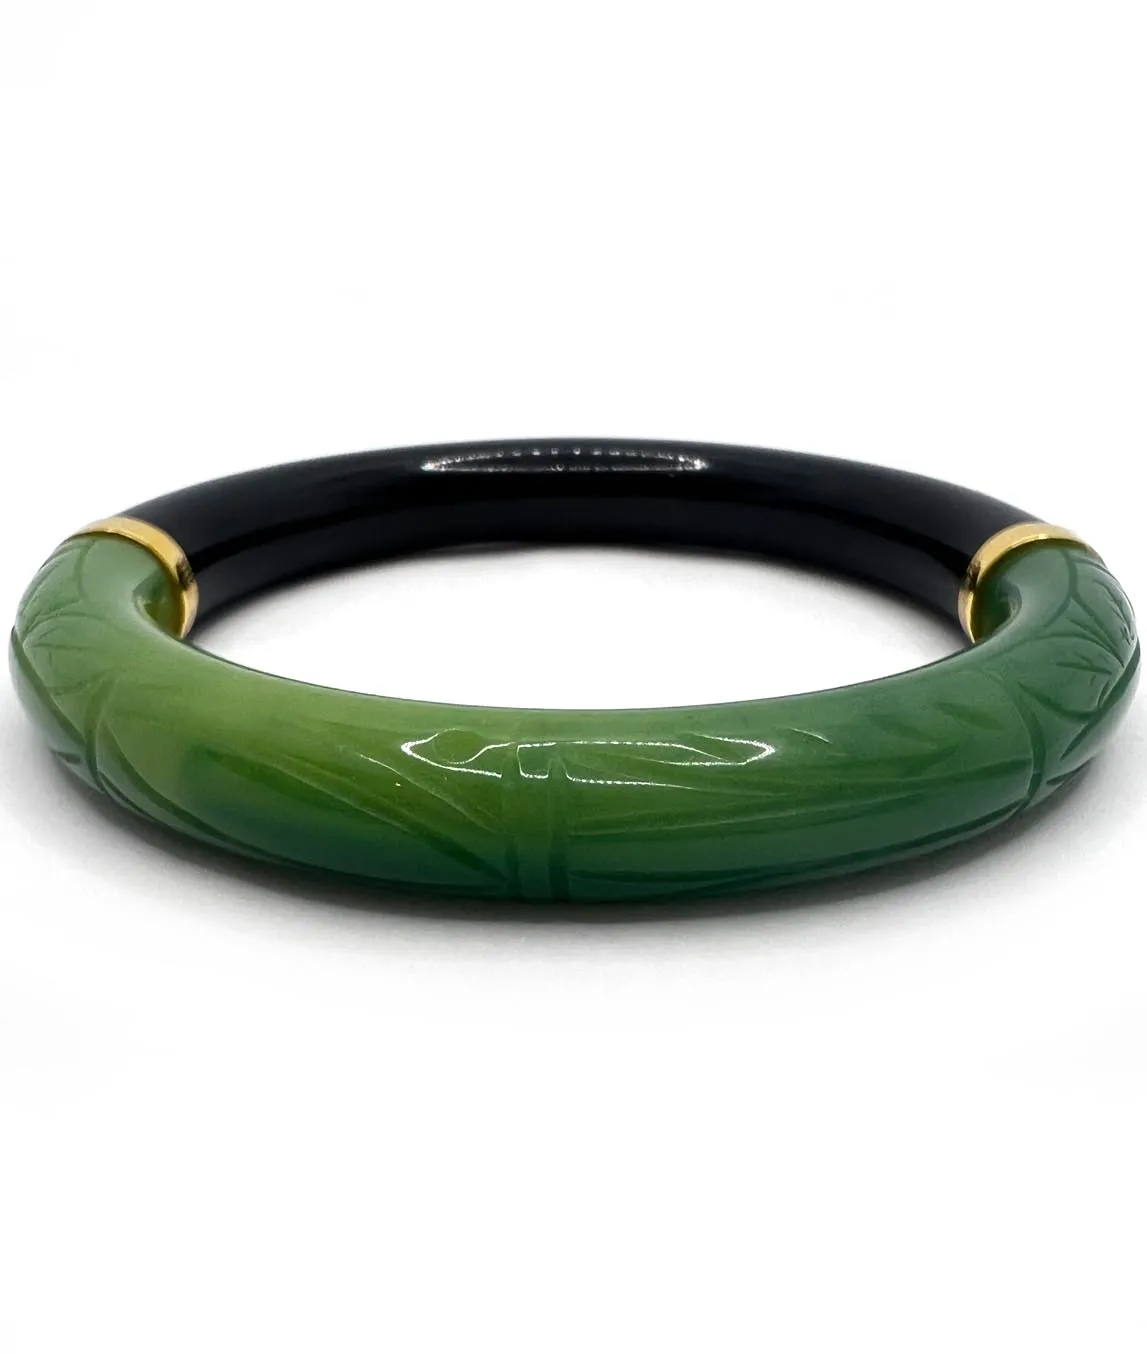 Givenchy green and black bangle with gold joins view of carved green side